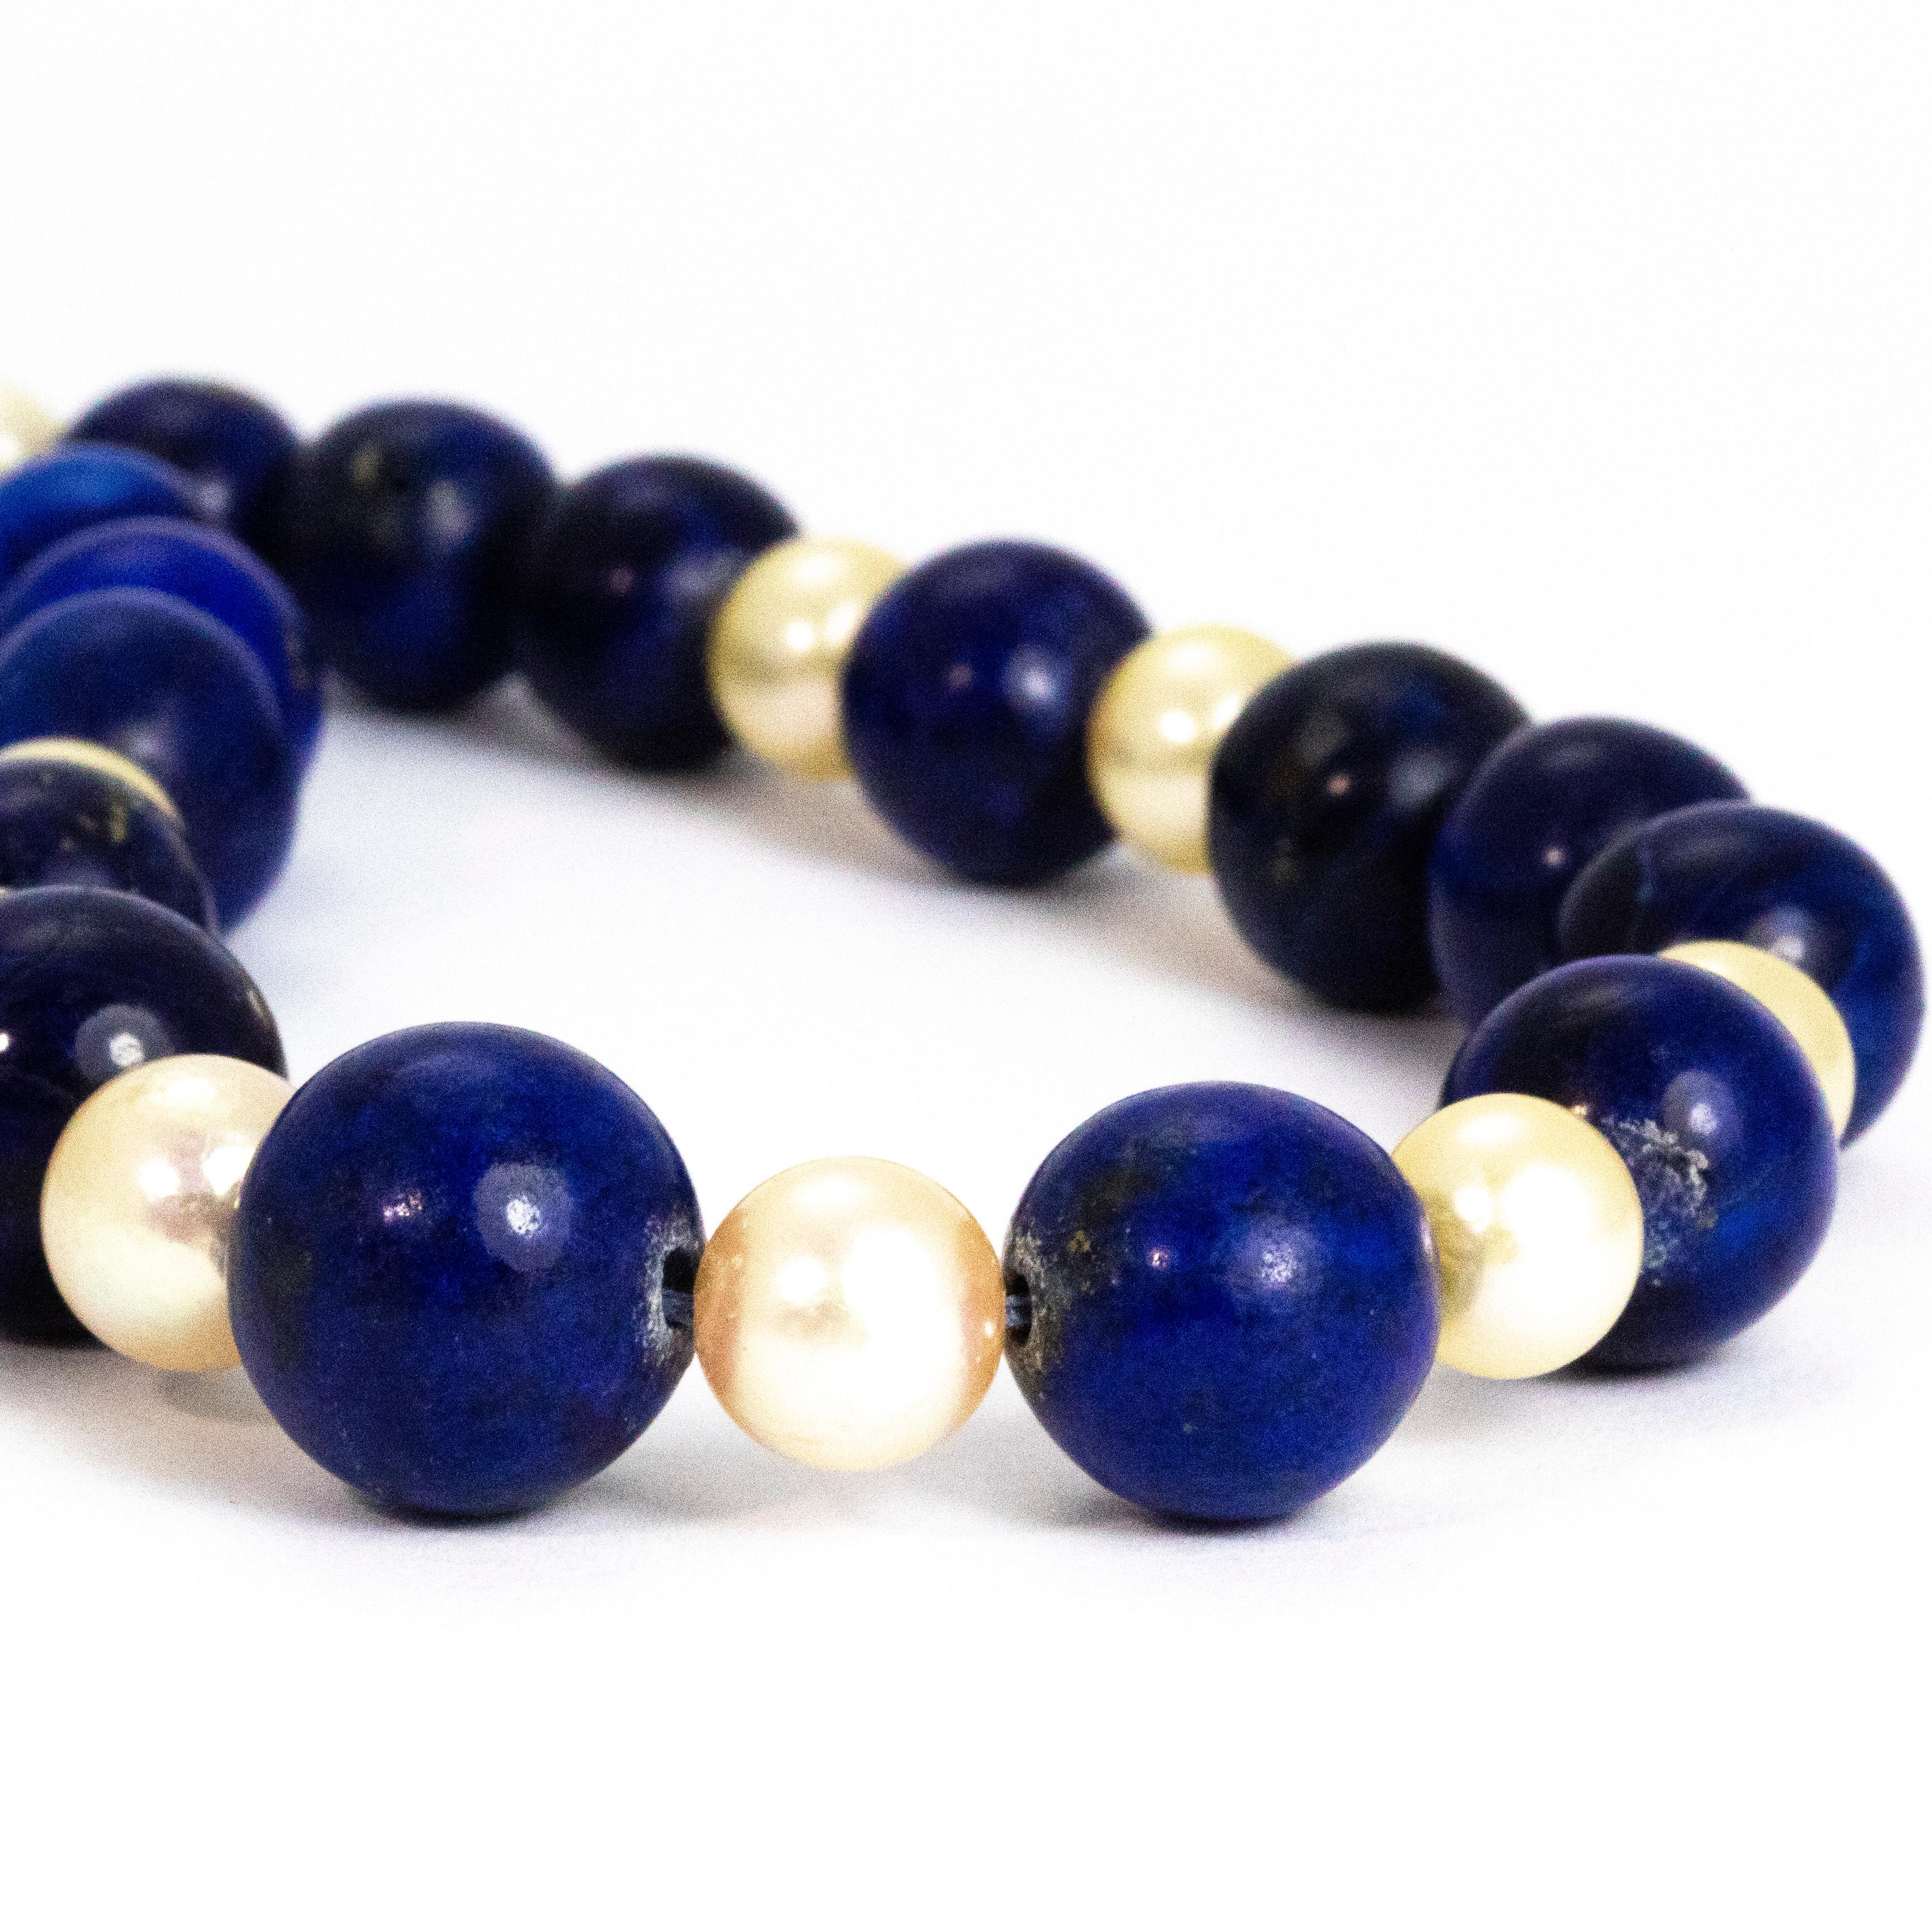 The blue of the gorgeous lapis stone beads really pop next to the glossy pearl spacers. There is no question that the bright blue beads are the main attraction of this necklace. They are graduated in size with the biggest beads at the centre getting